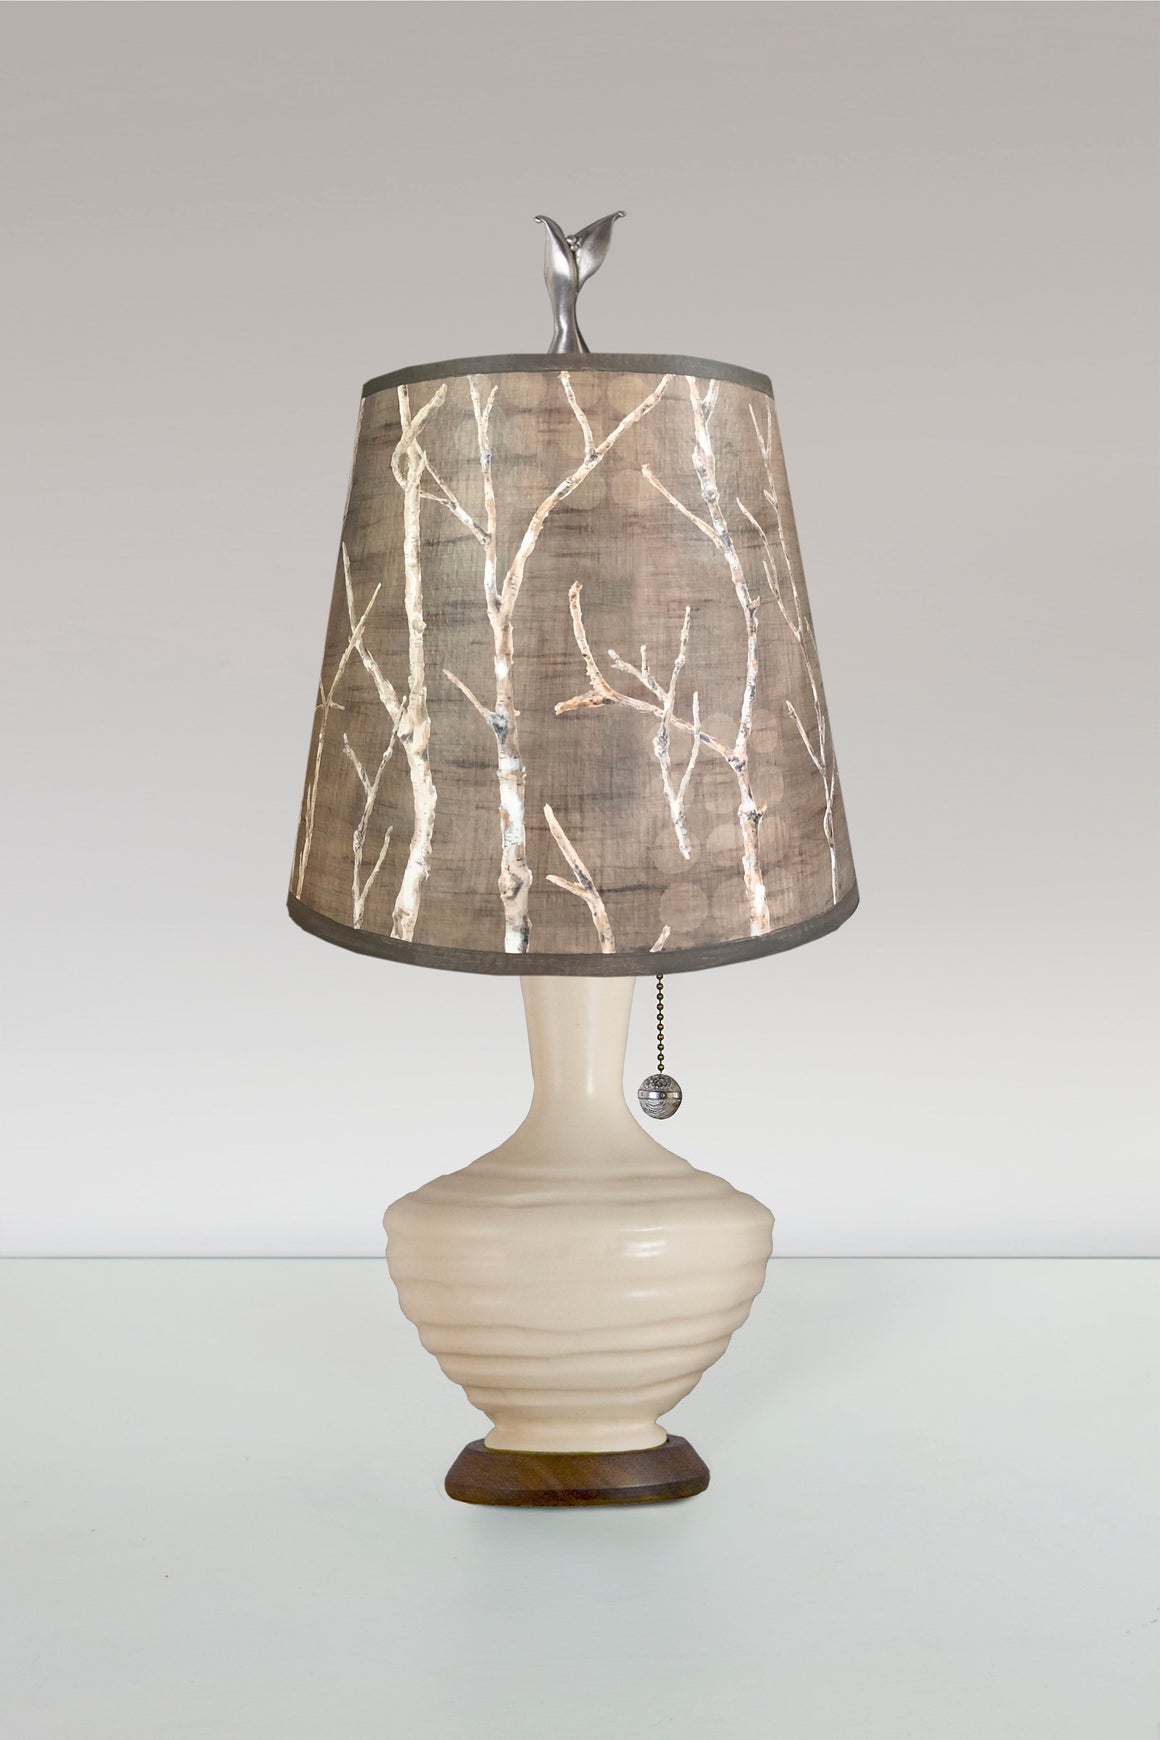 Ceramic Table Lamp with Small Drum Shade in Twigs